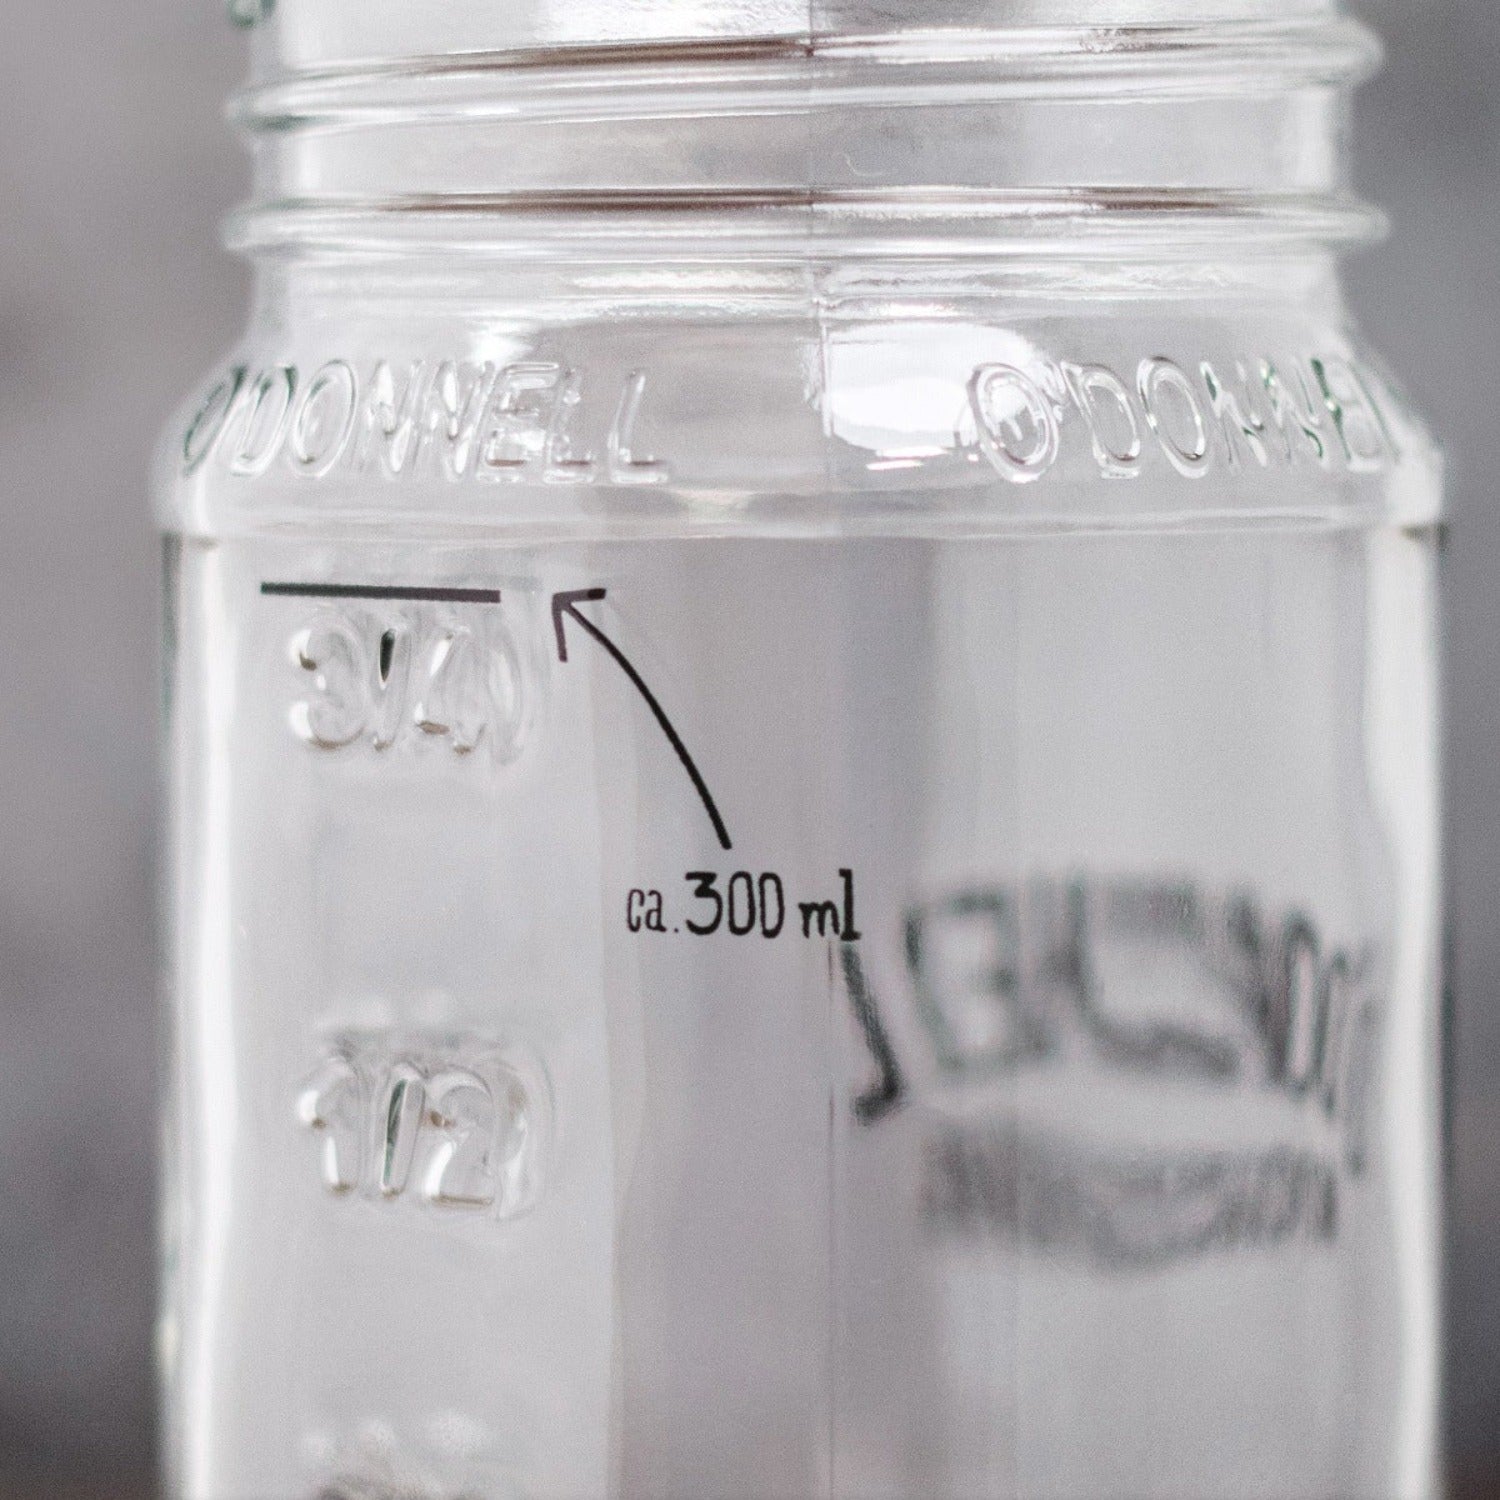 O Donnell Moonshine Long Drink Glass close up